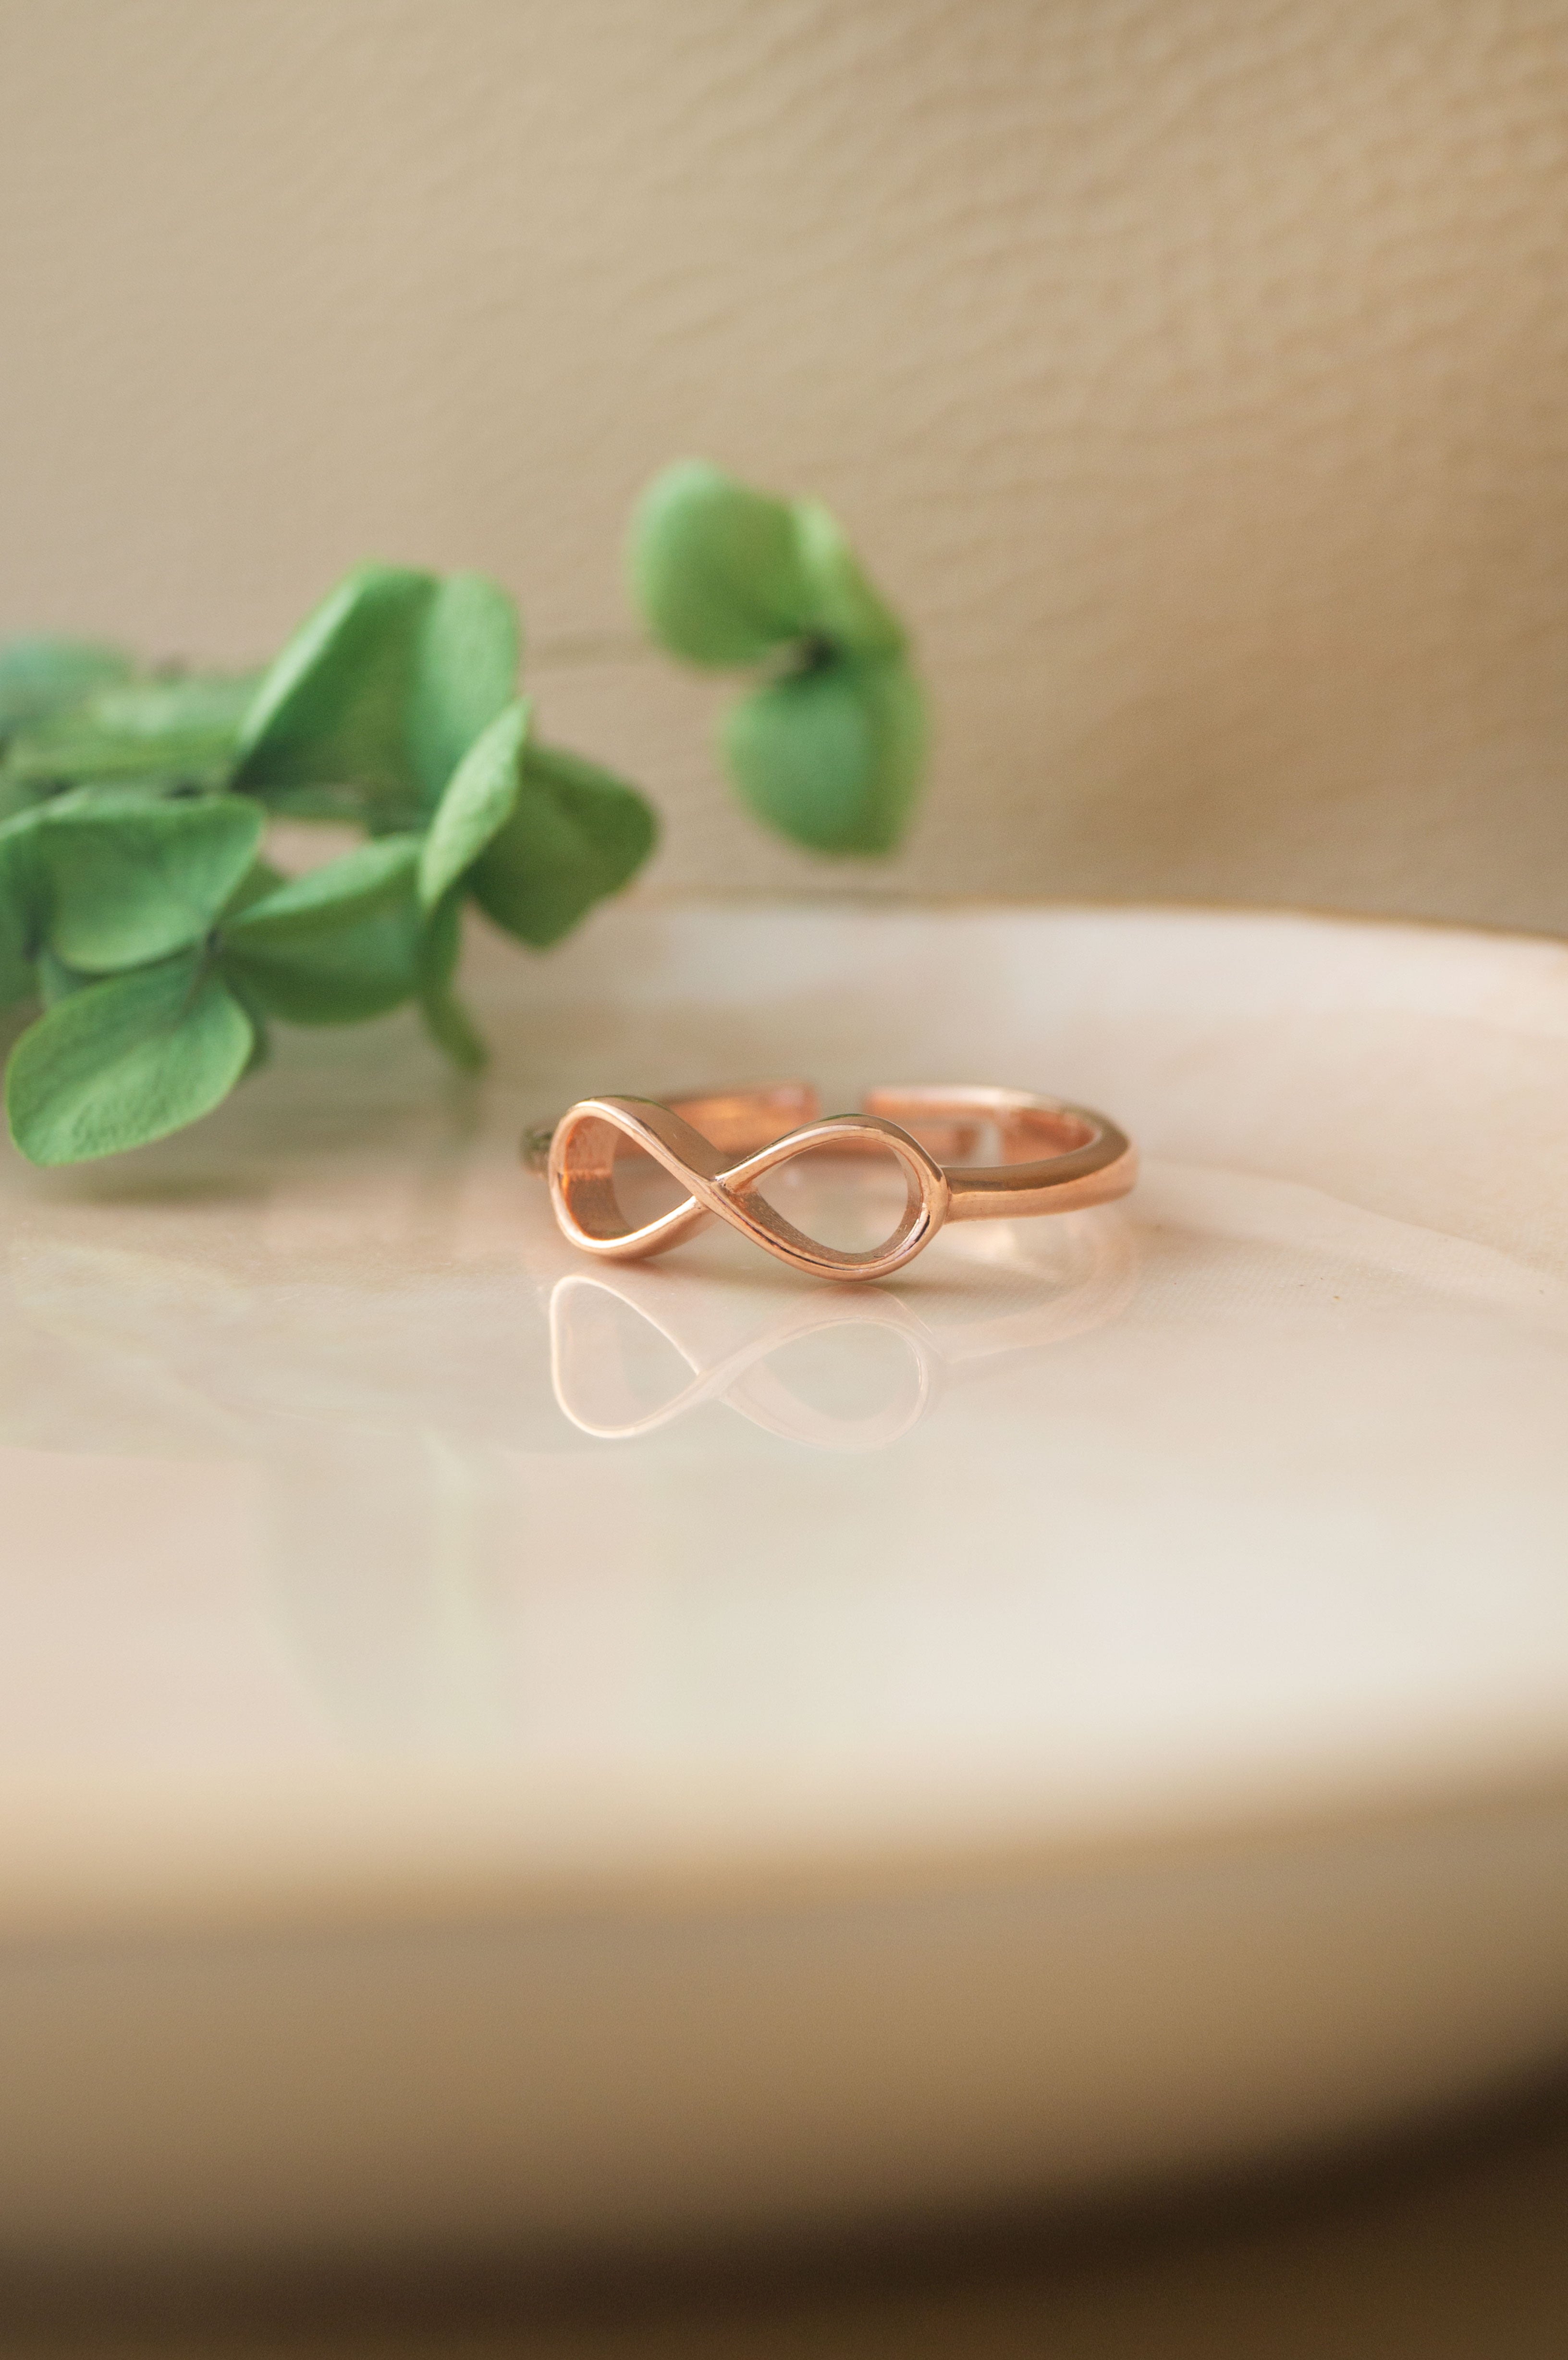 Buy 14K Solid Gold Infinity Ring, 925 Sterling Silver Infinity Ring,  Infinite Love Ring, Infinity Ring, Valentine's Day Gift, Christmas Gift  Online in India - Etsy